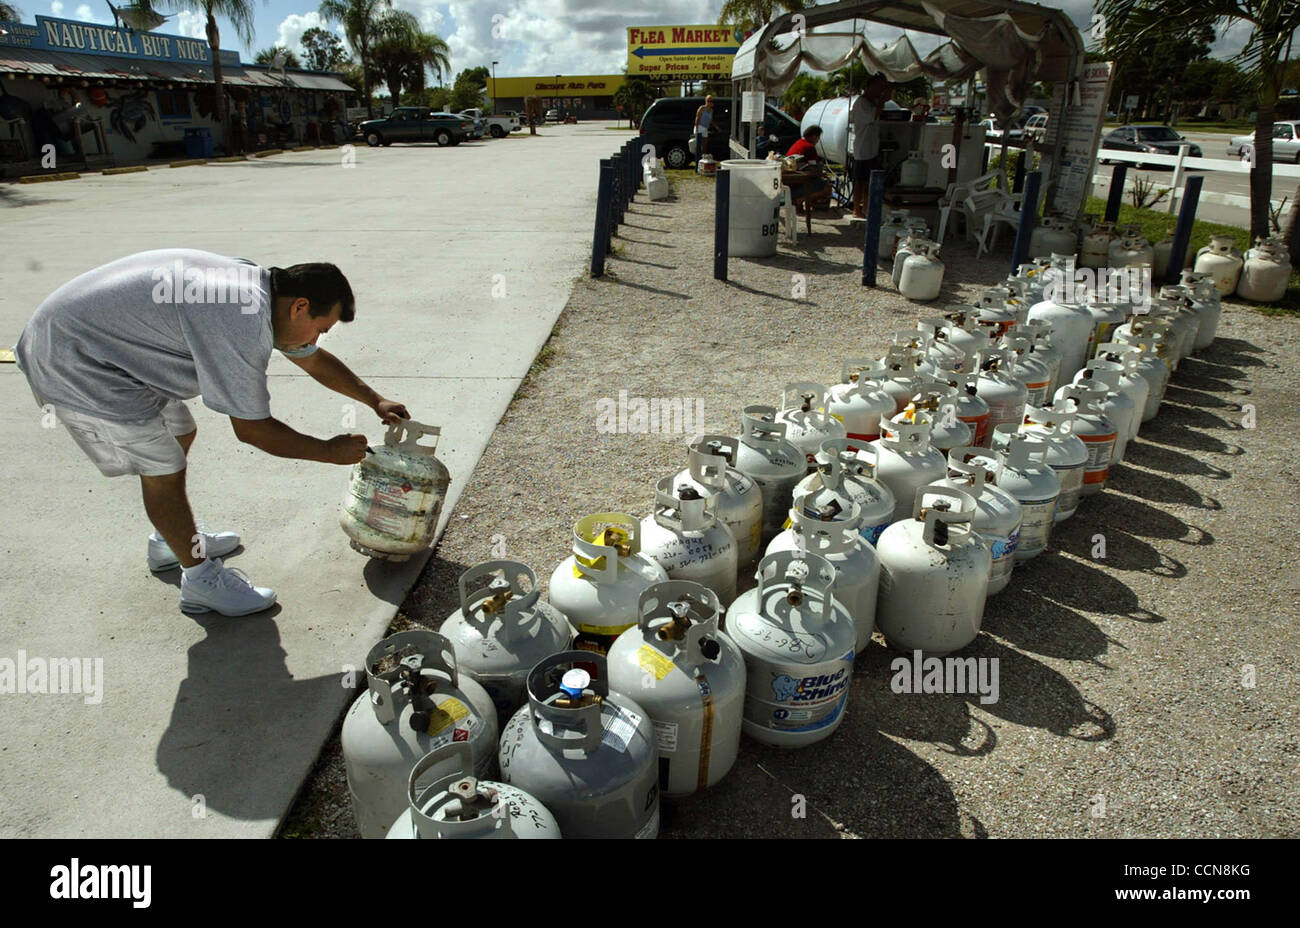 090104 TC MET Stuart...The line formed early wednesday for patrons needing propane tanks filled  in order to be ready for Hurricane Frances.  A propane filling station located in front of the store 'Nautical But Nice' along US 1 in Stuart wednesday morning.  Stuart resident Rufino Perez, left, write Stock Photo